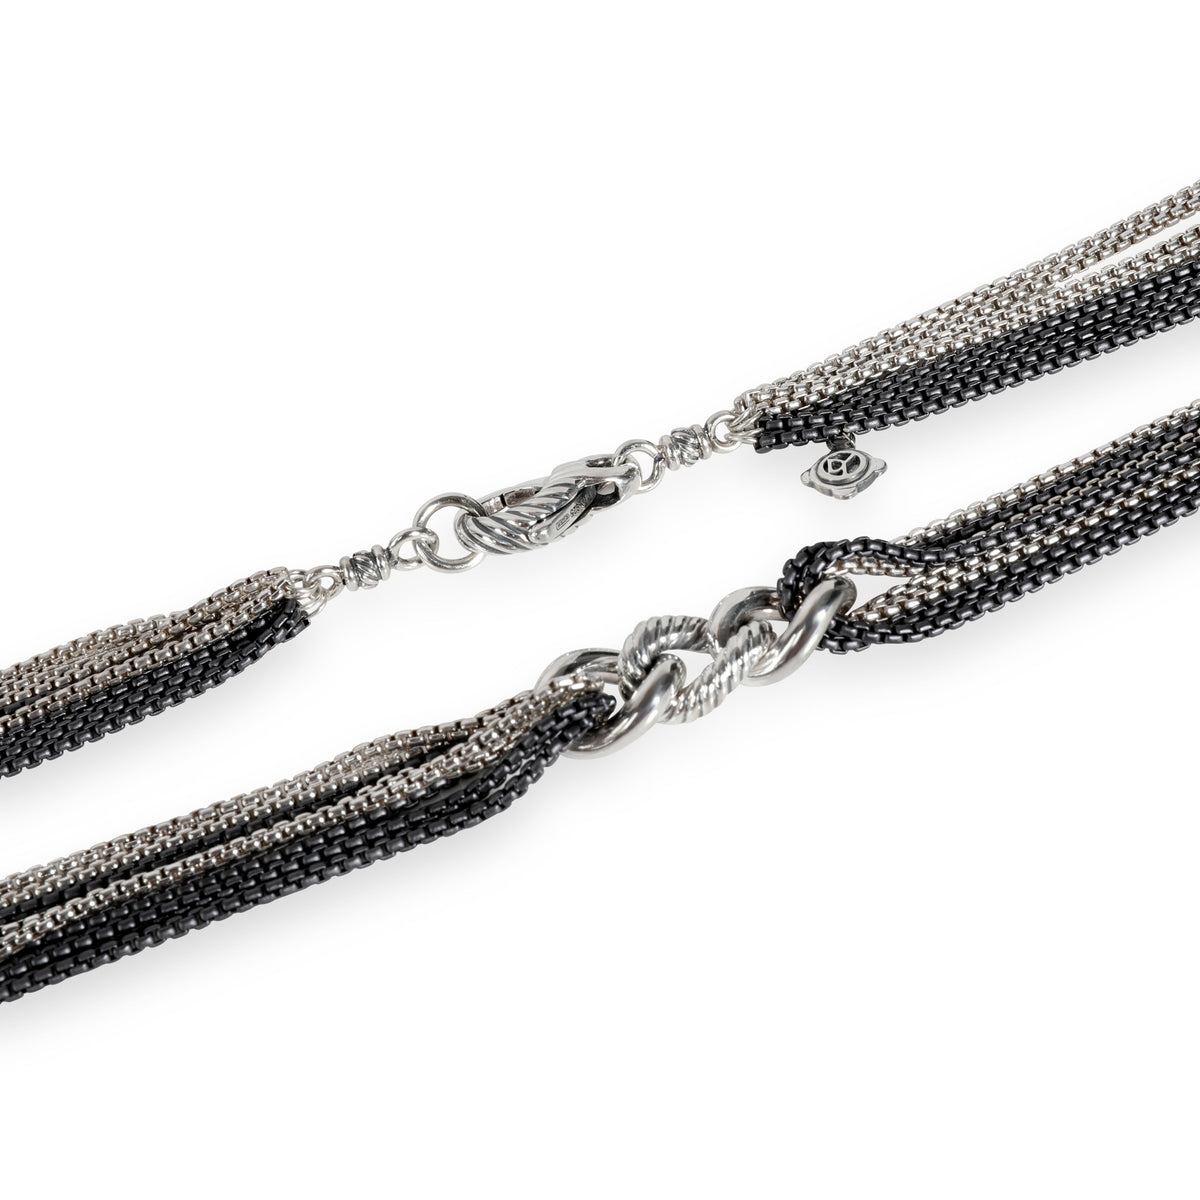 David Yurman Multi-Strand Cable Curb Link Necklace in Blackened Sterling Silver